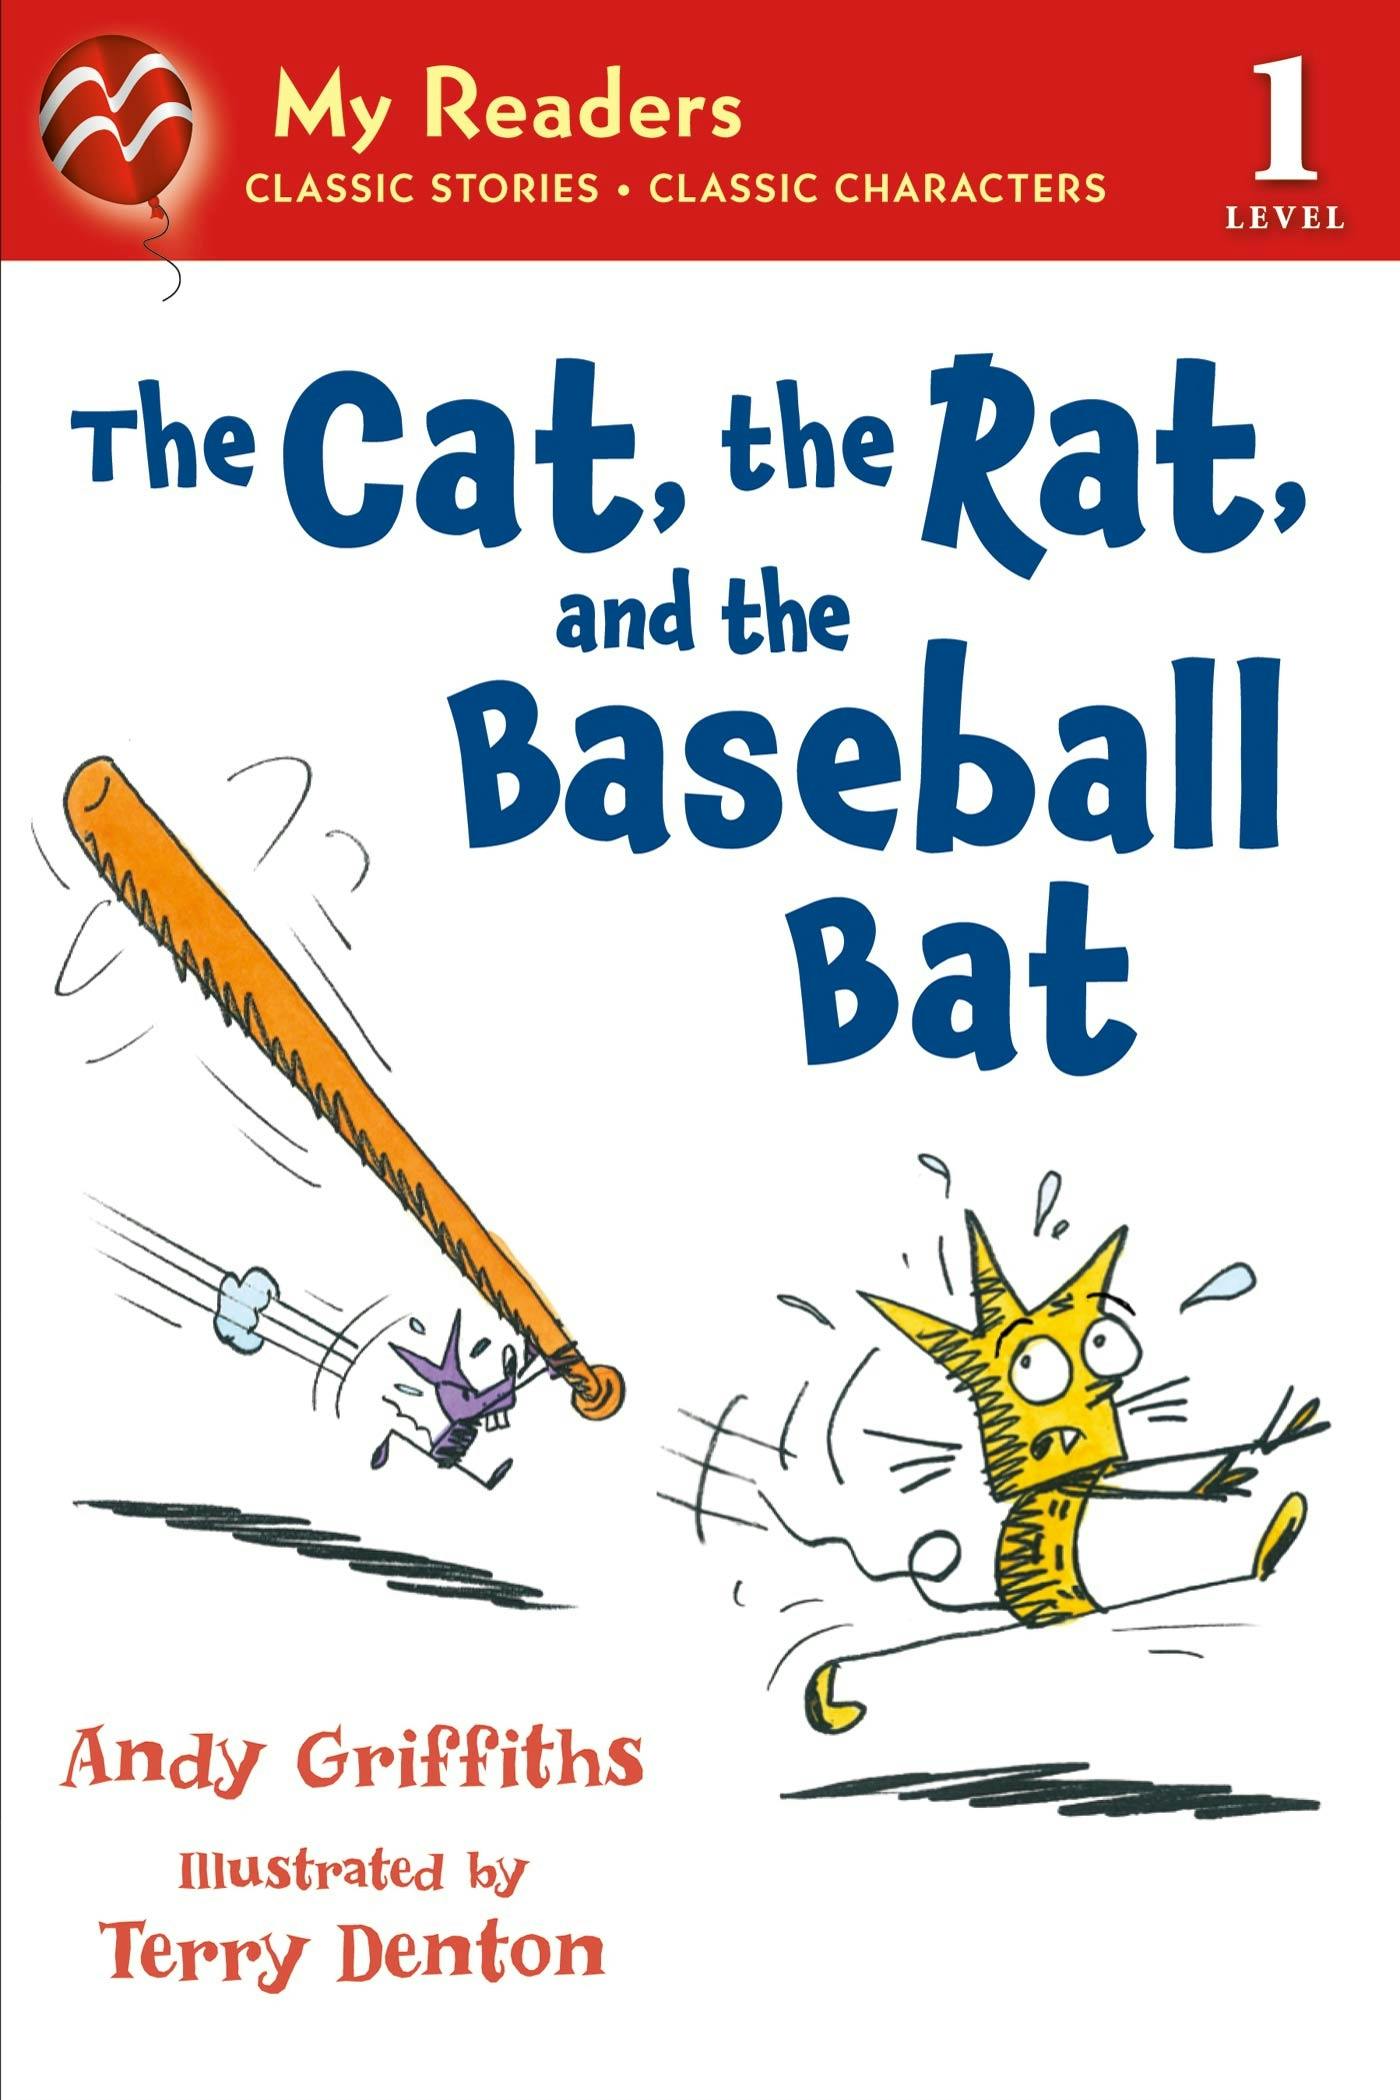 Image of The Cat, the Rat, and the Baseball Bat